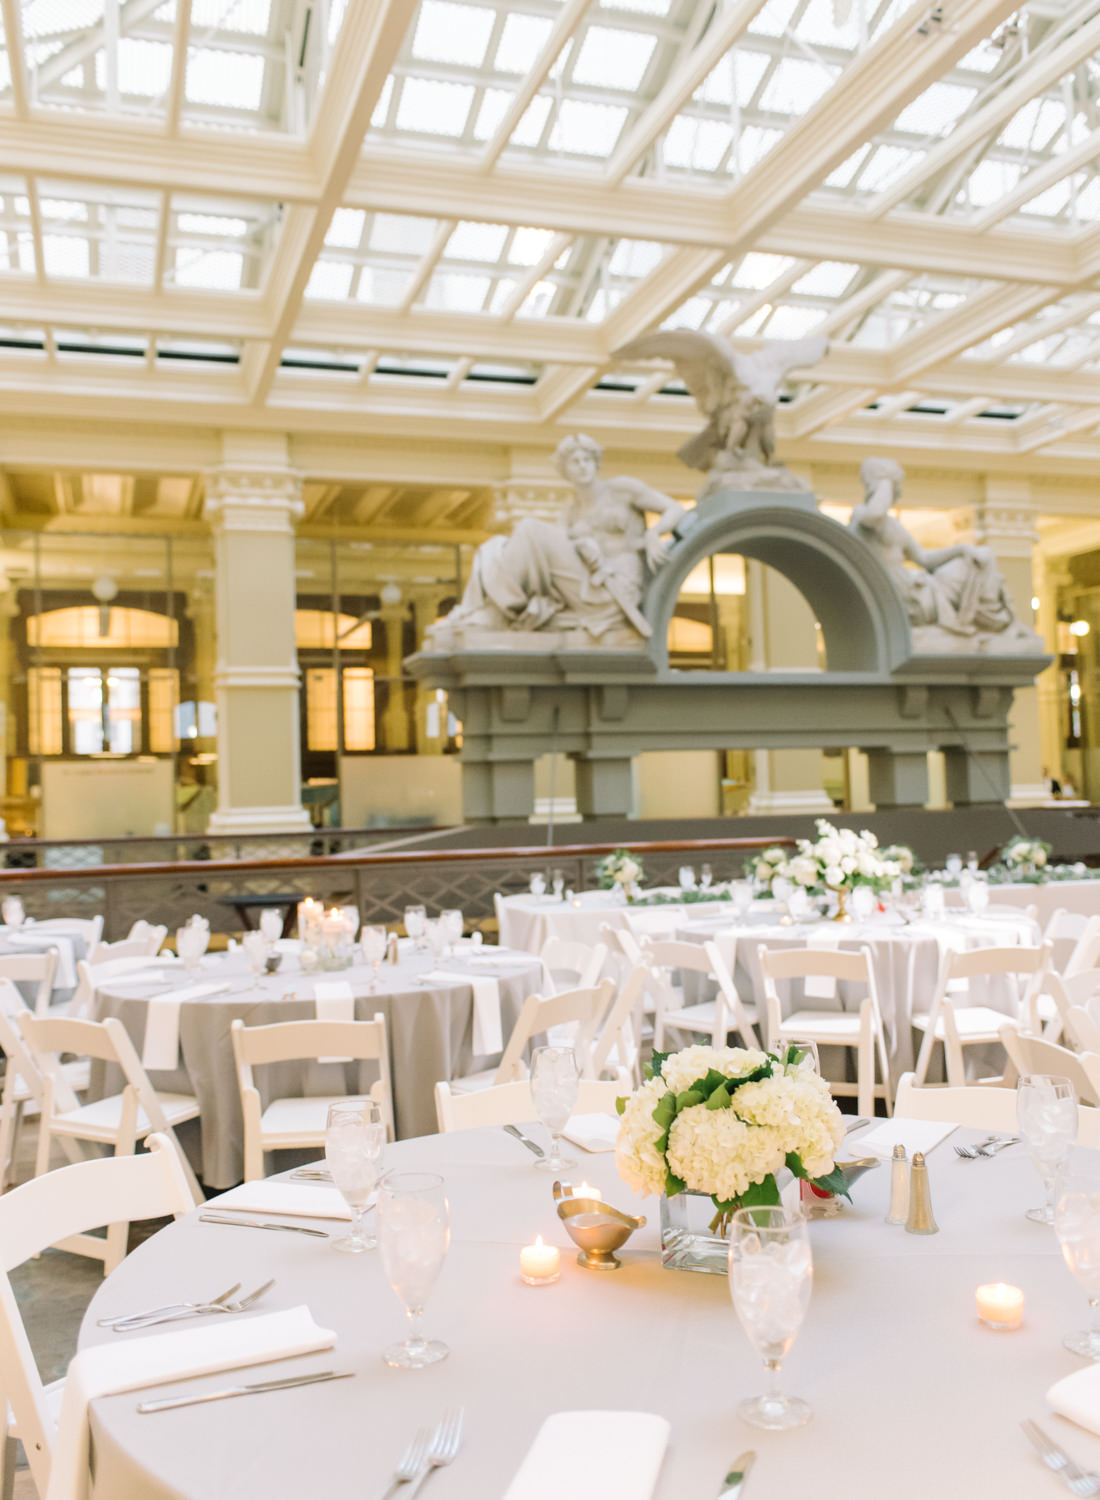 Wedding reception details at St. Louis Old Post Office and Custom House; St. Louis fine art film wedding photographer Erica Robnett Photography